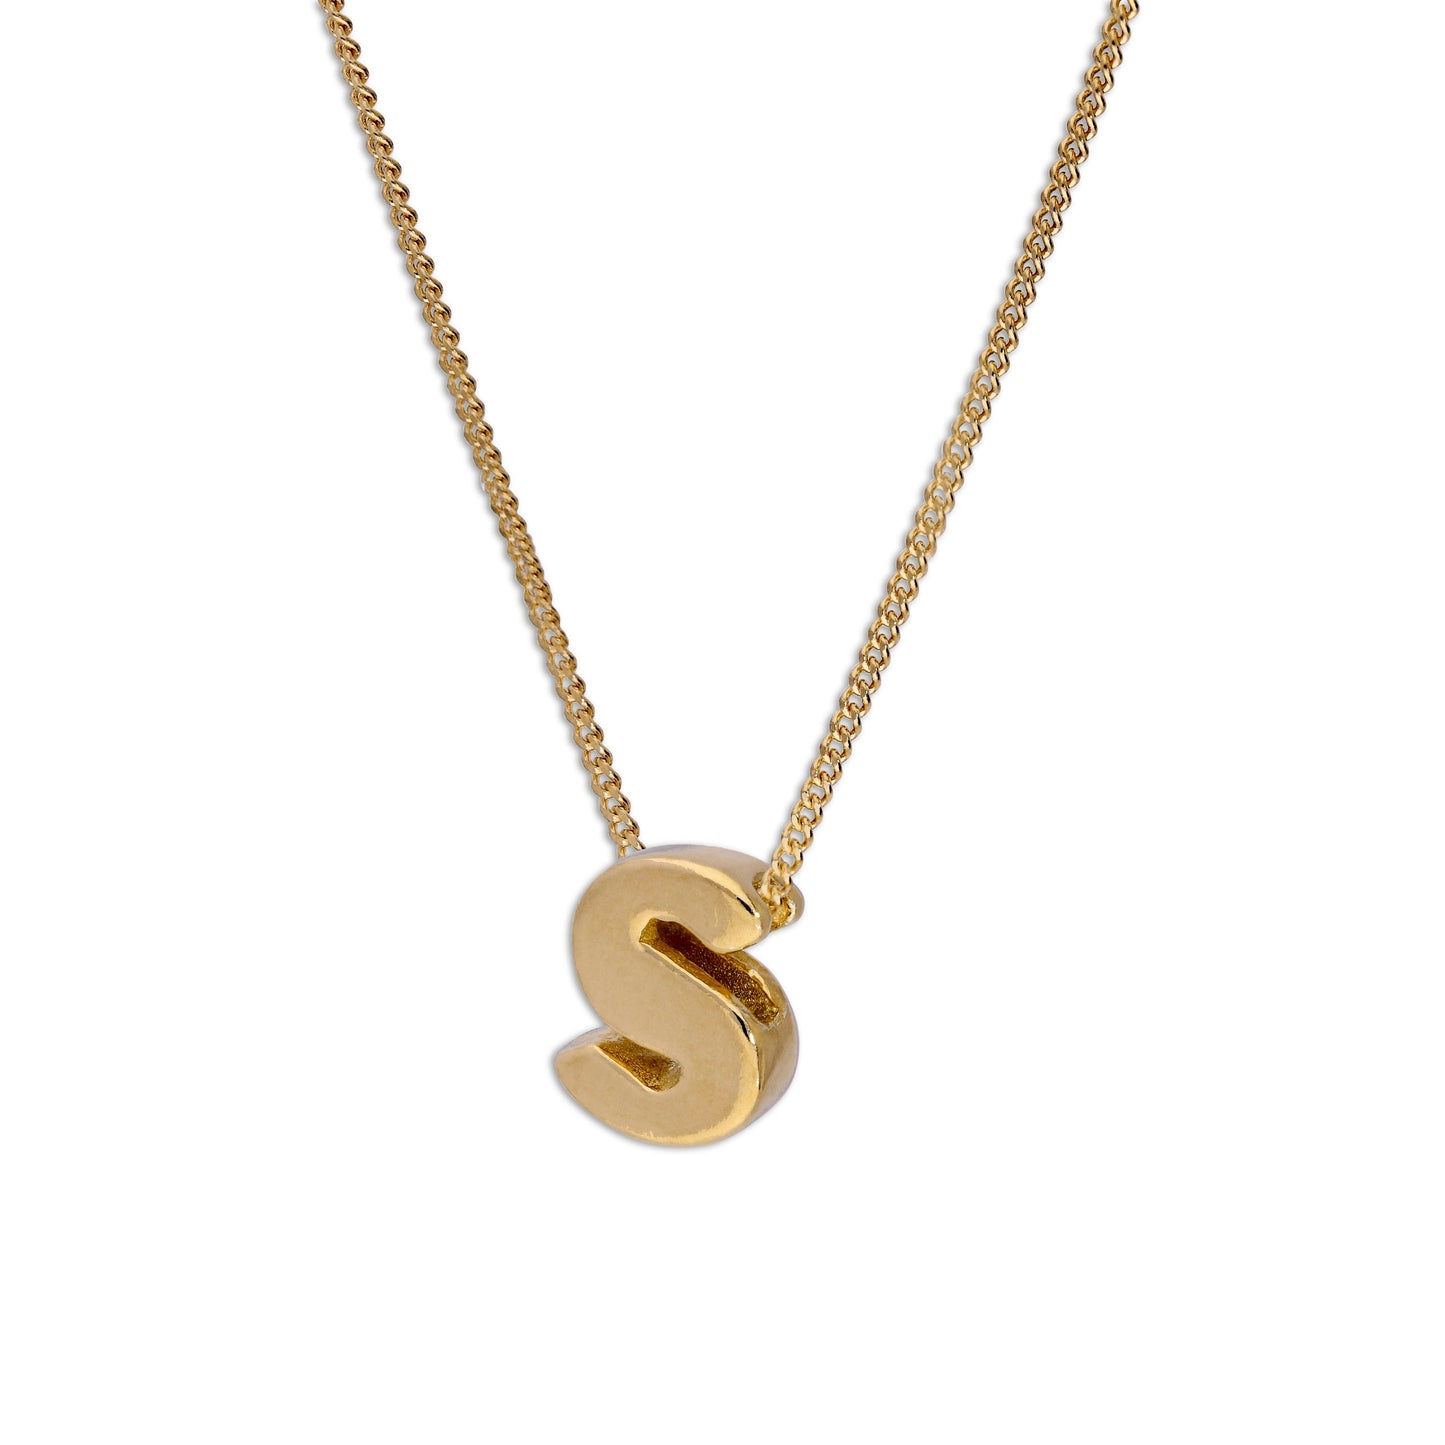 Gold Plated Sterling Silver Threader Letter S Bead Necklace 16 - 22 Inches